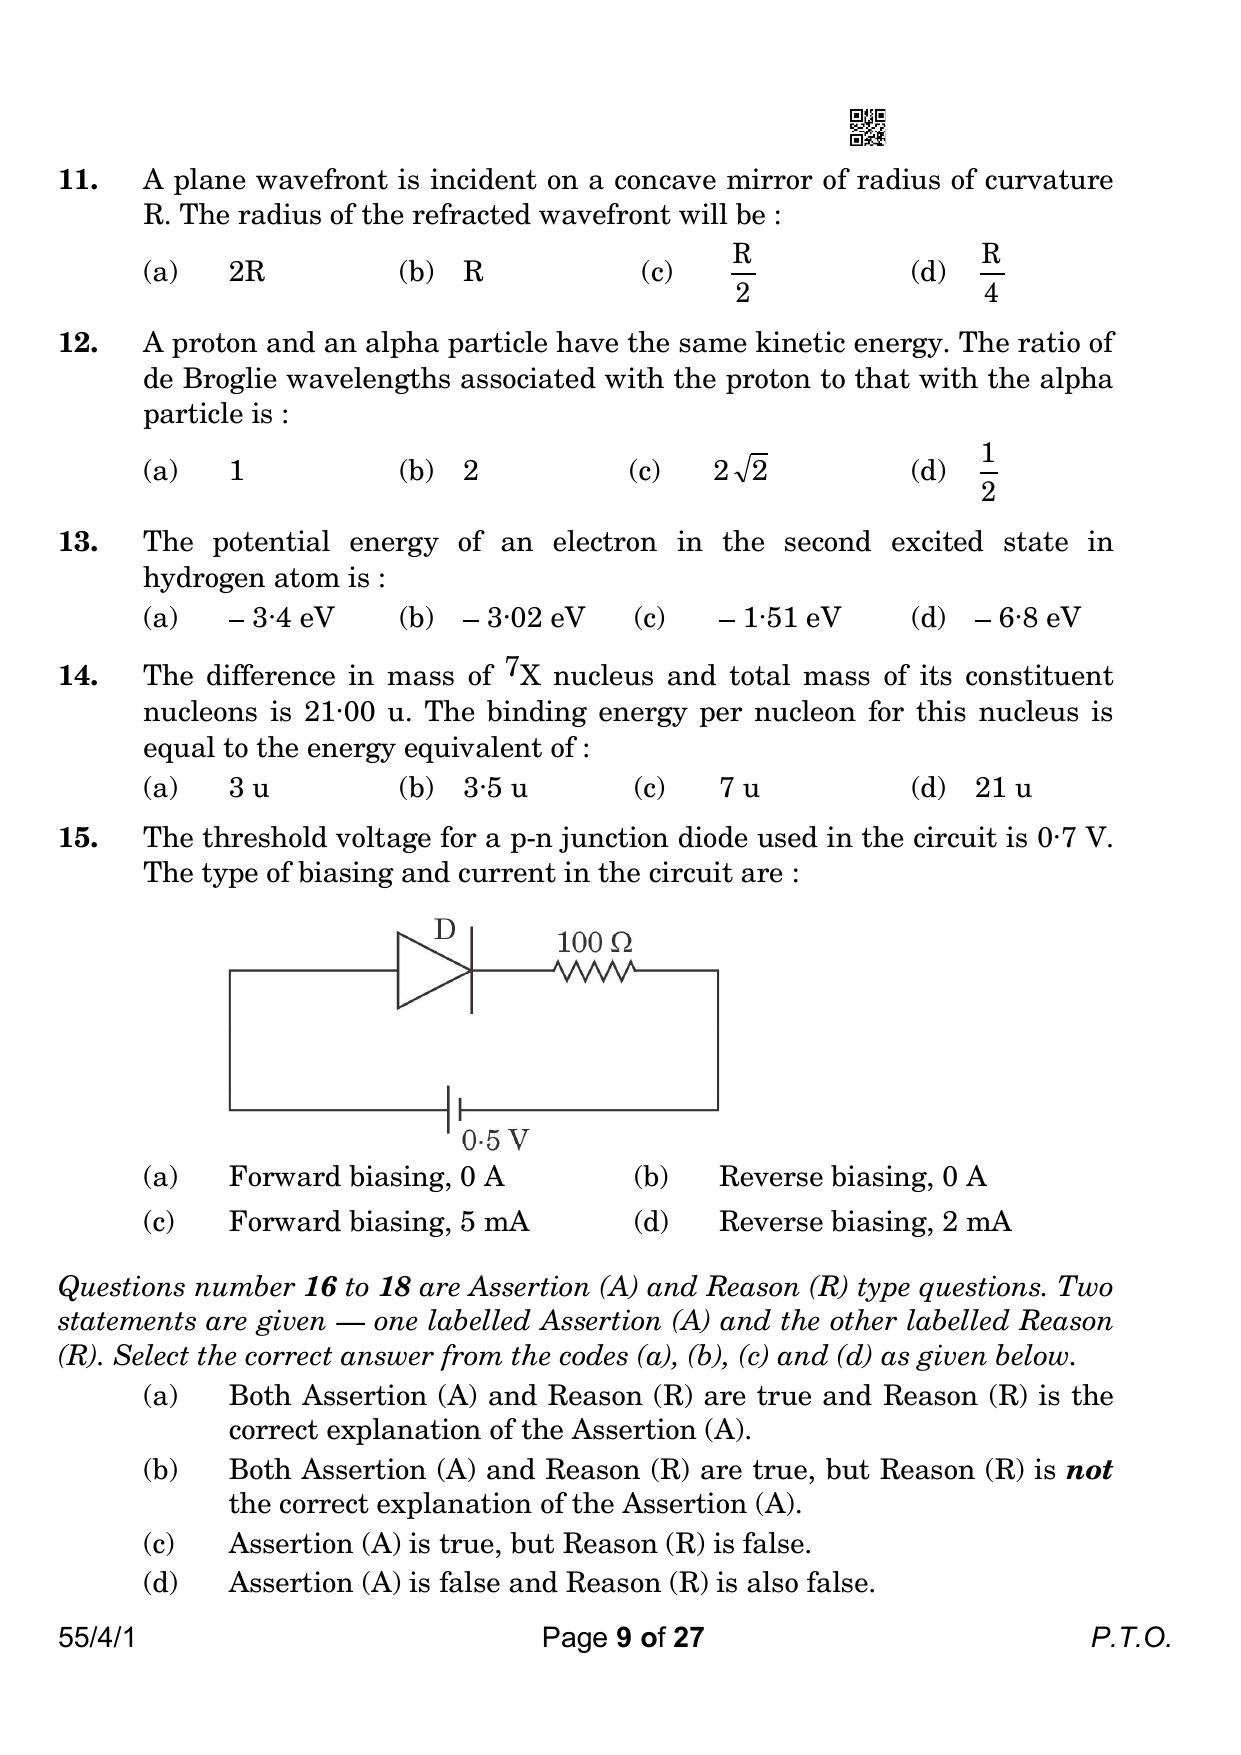 CBSE Class 12 55-4-1 Physics 2023 Question Paper - Page 9